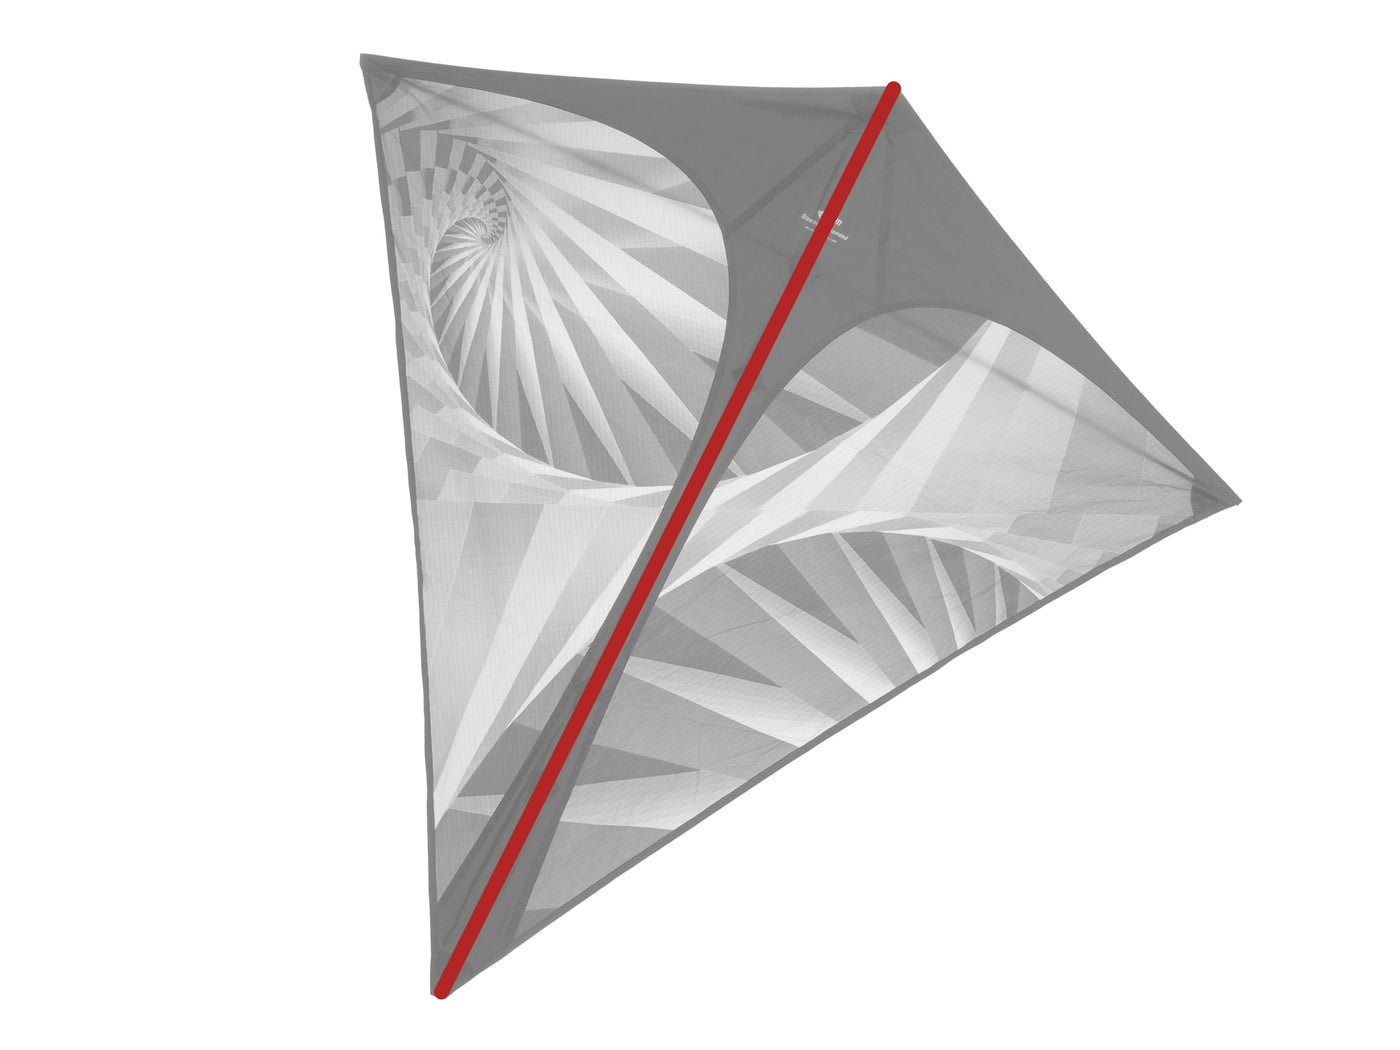 Diagram showing location of the Stowaway Diamond Spine on the kite.